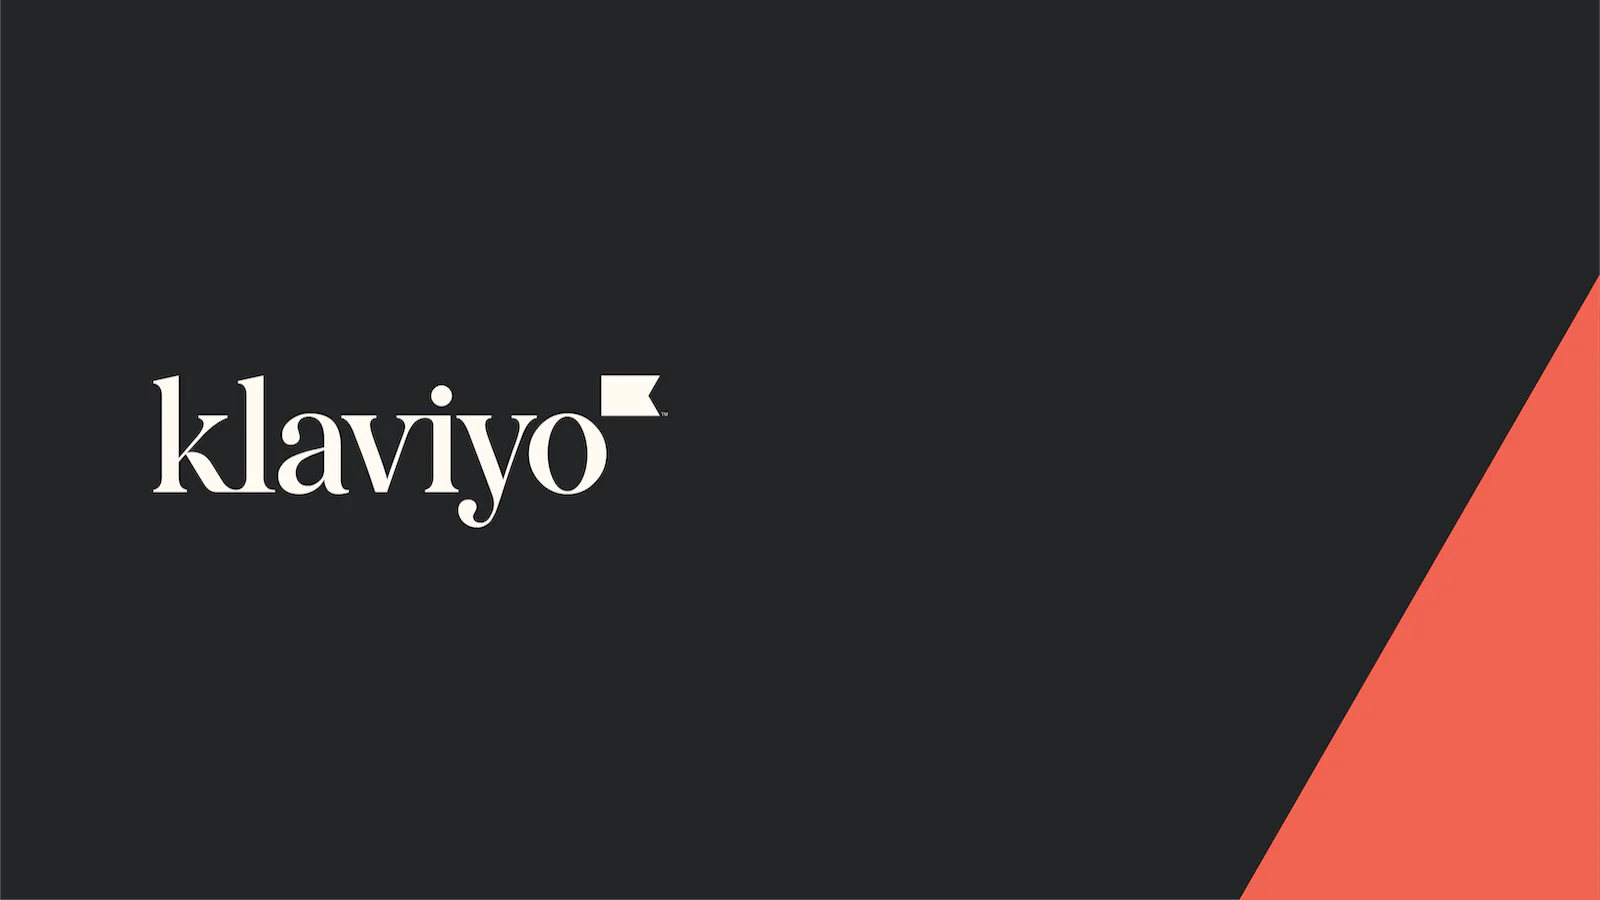 Why is Klaviyo so popular for Shopify stores?